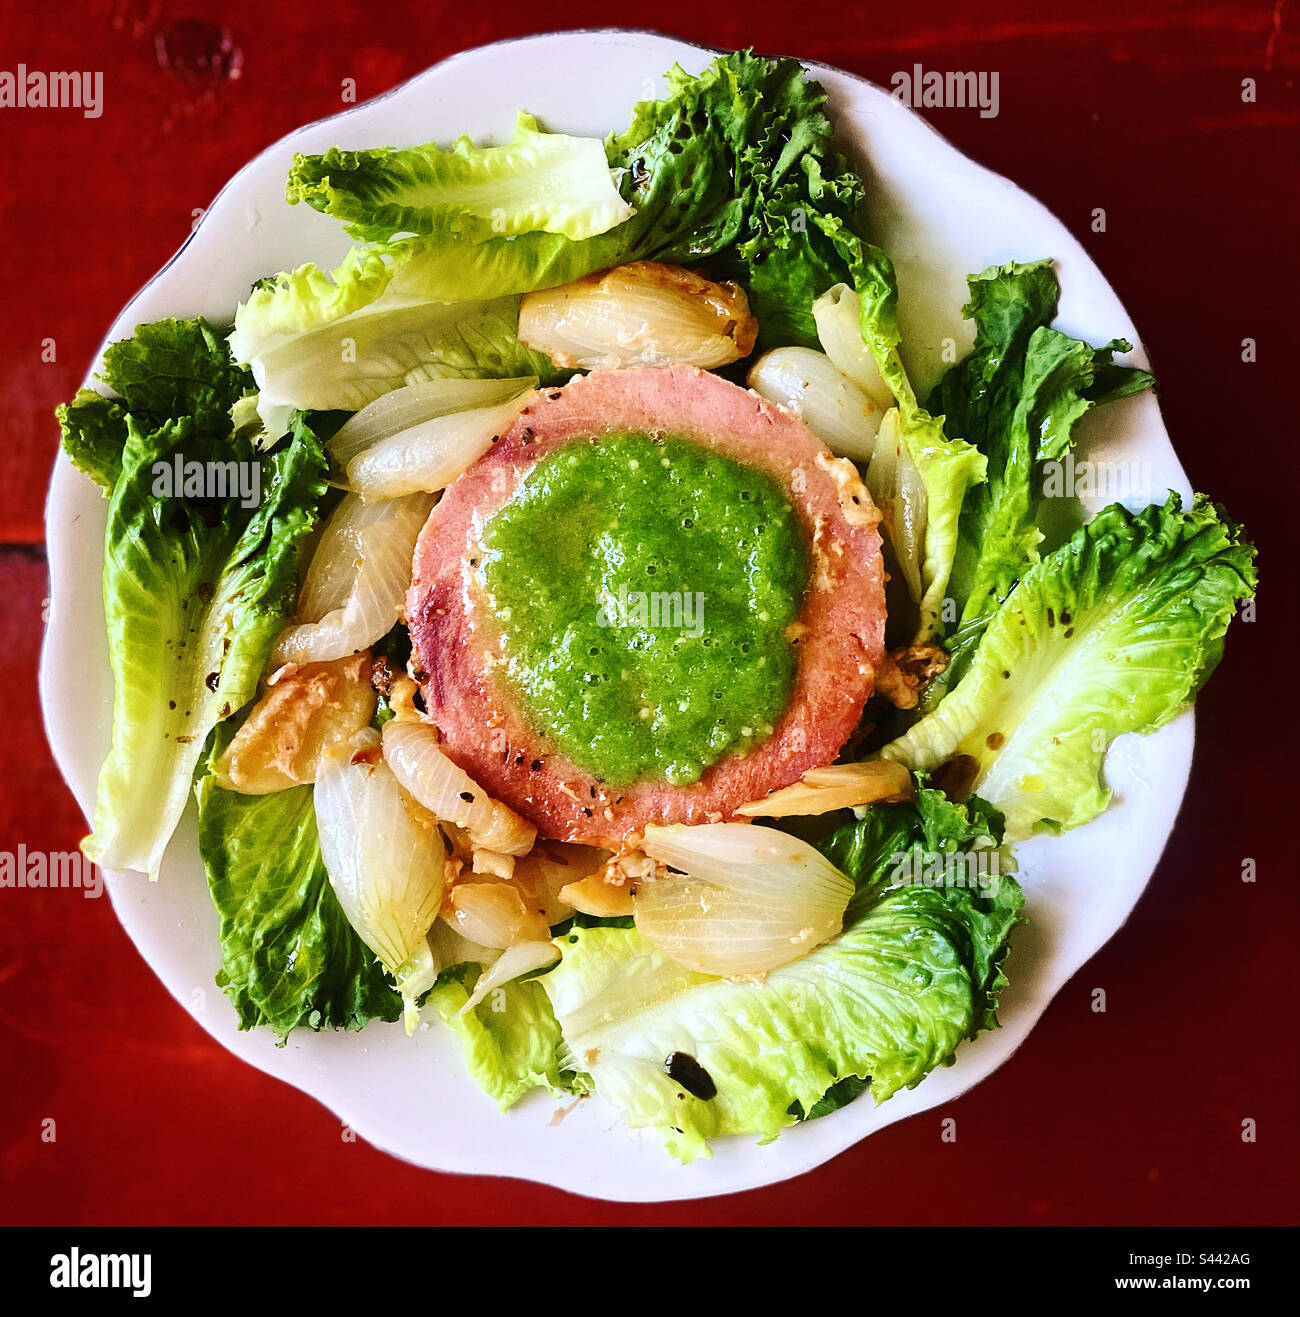 A grilled tuna fish filet covered with green sauce and surrounded by grilled onion and garlic an lettuce salad in Queretaro, Mexico Stock Photo